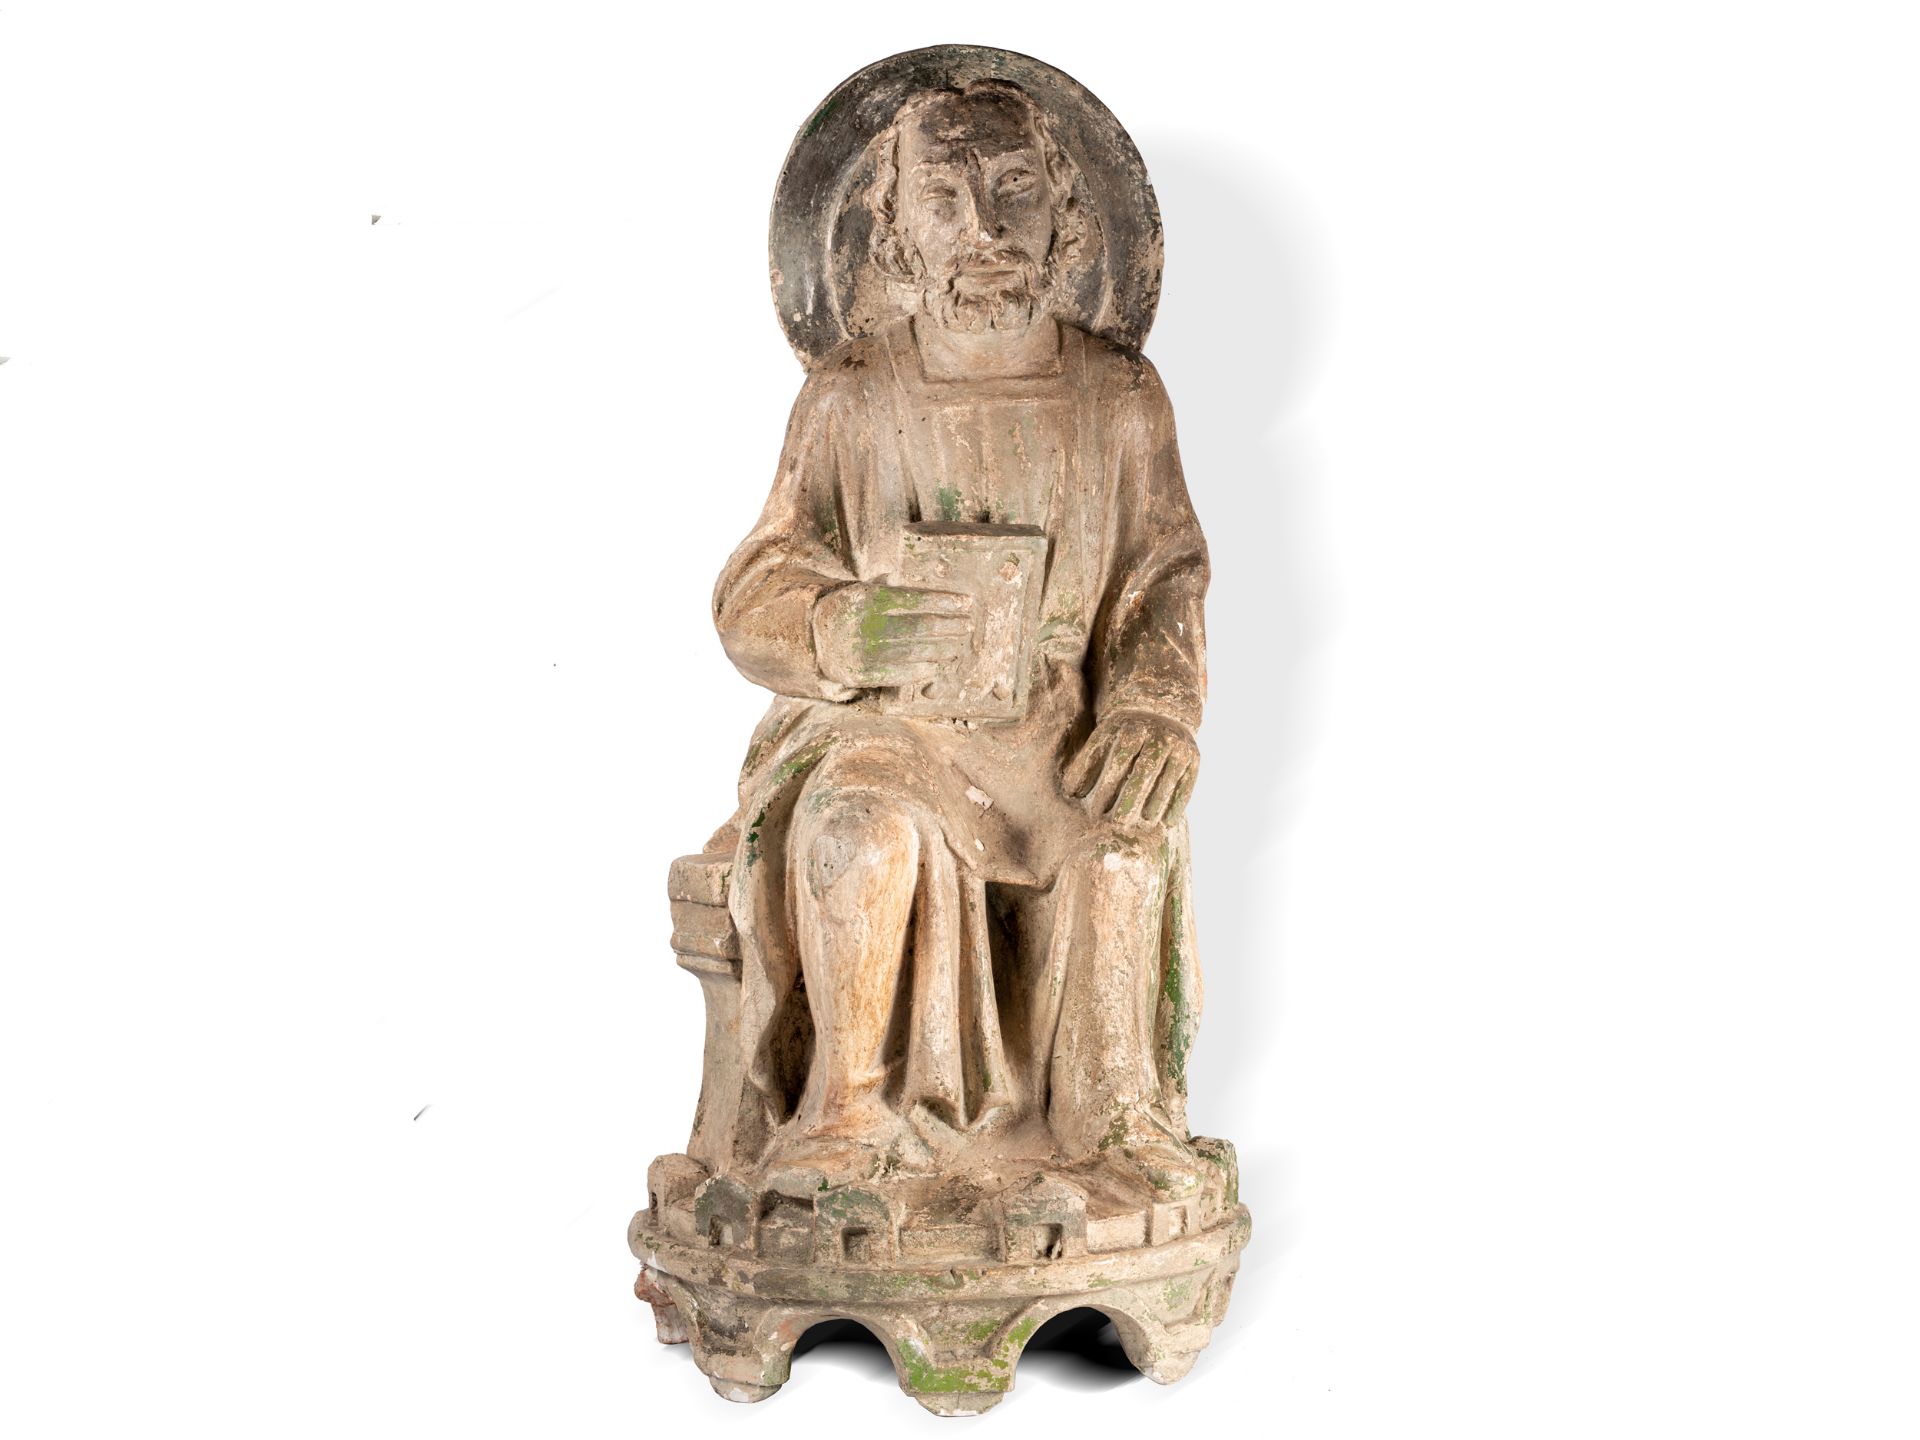 Museum sculpture of a seated apostle, Italy, In the style of the 14th century